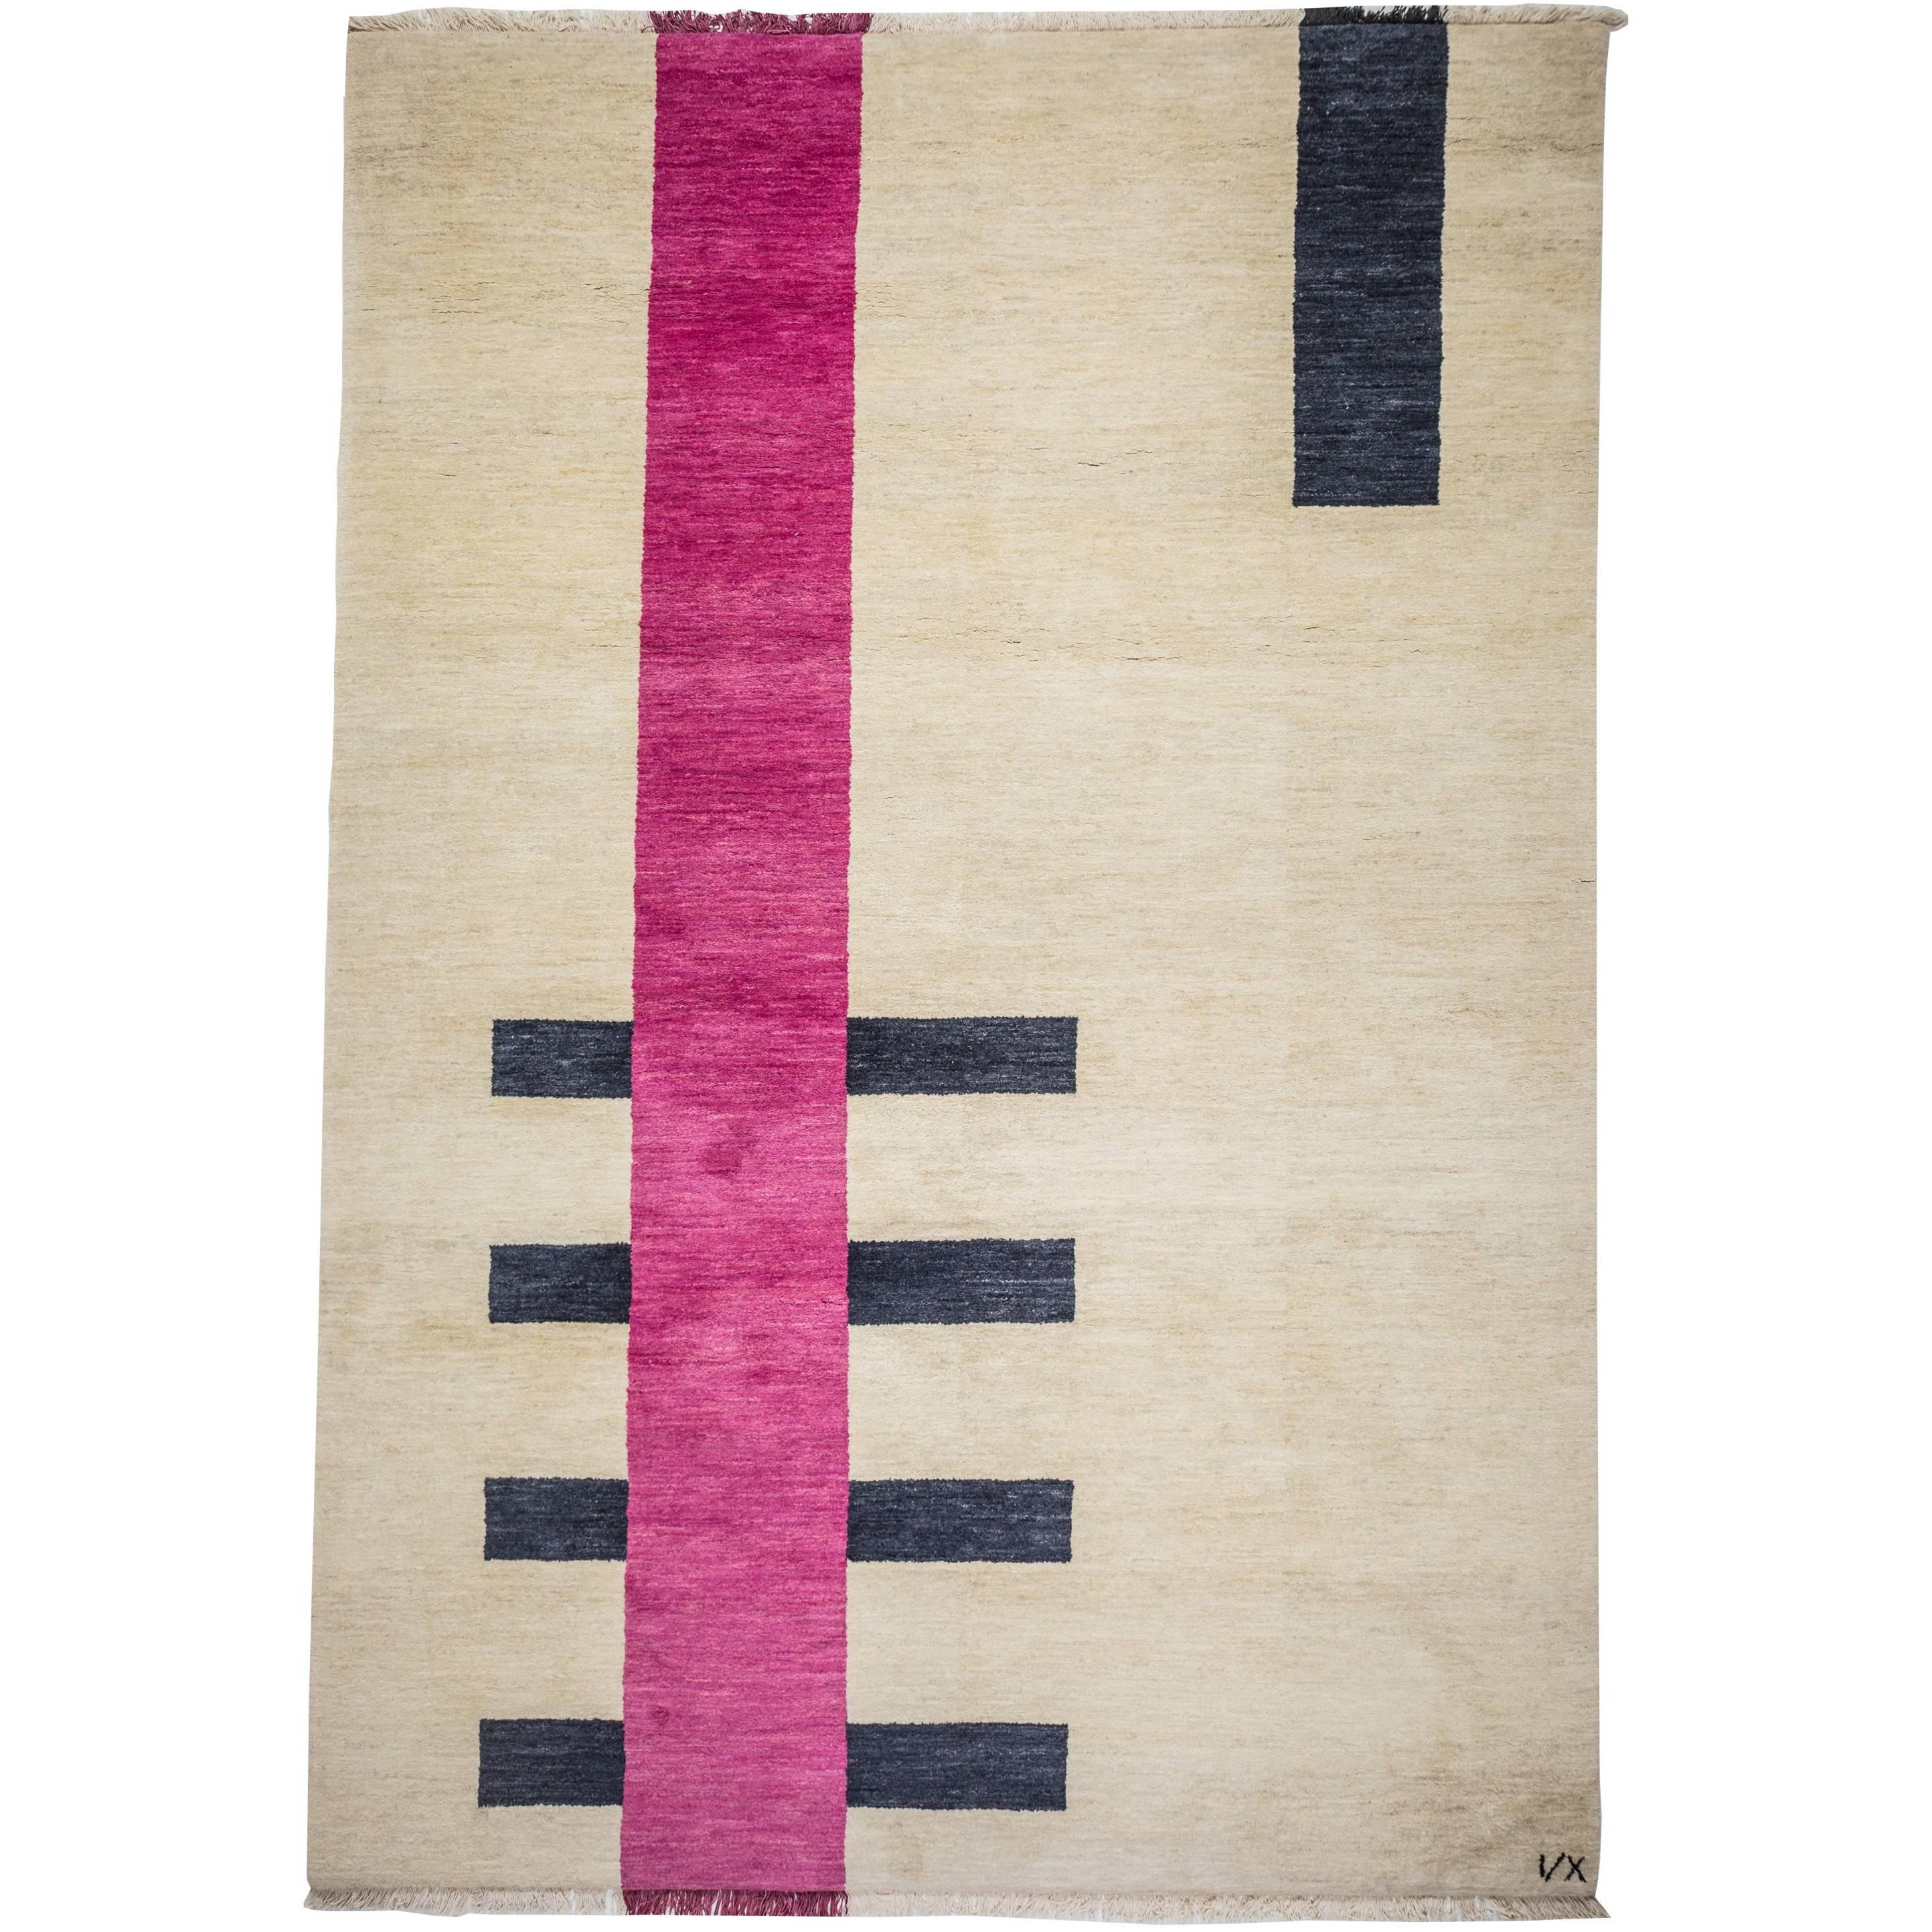  Rug Behind - Geometric Handknotted Cream Beige Wool in Pink Black by Carpets CC For Sale